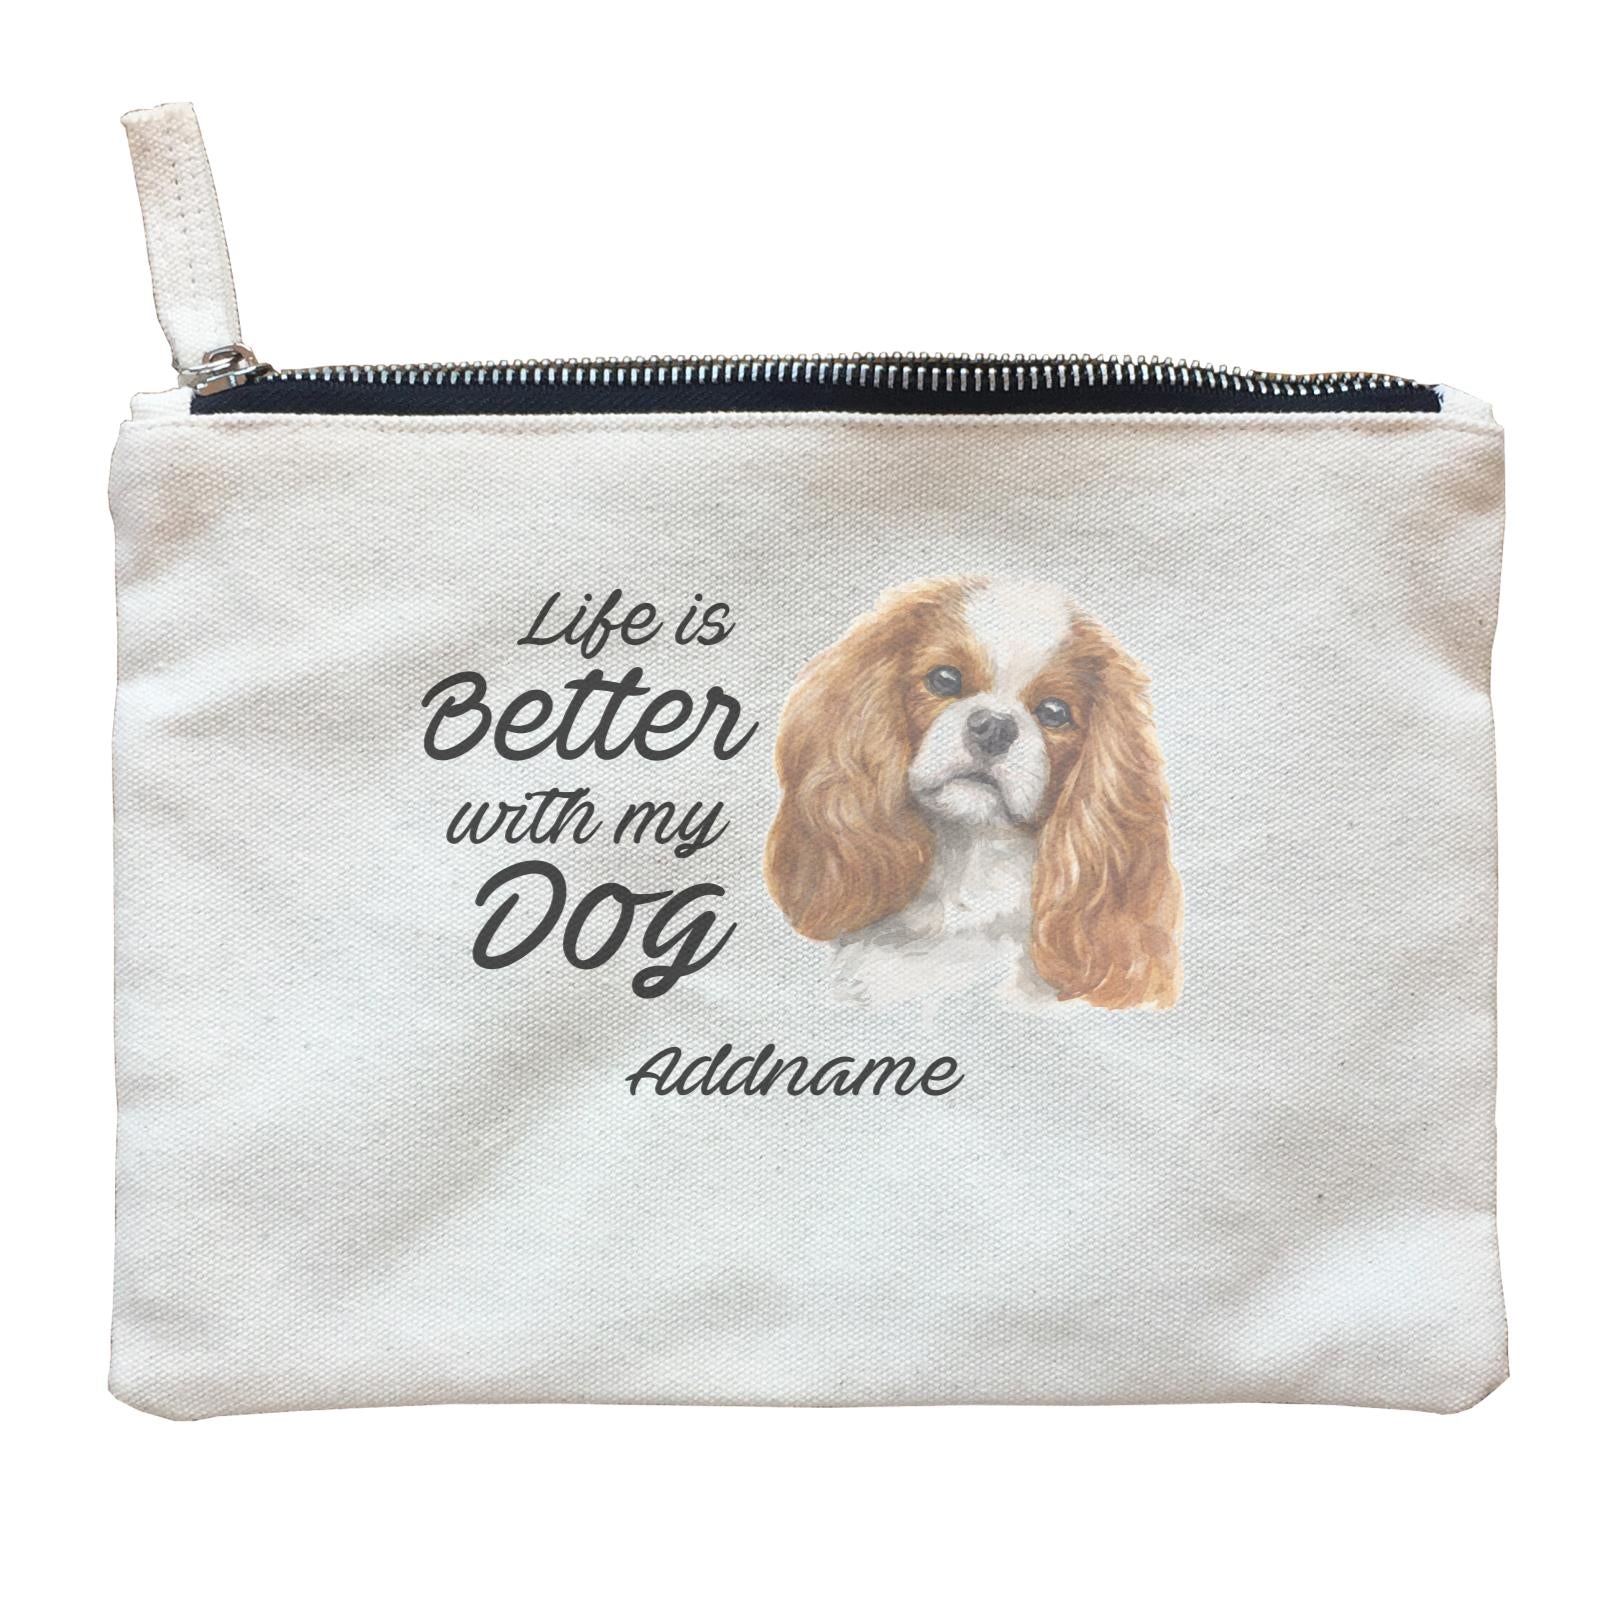 Watercolor Life is Better With My Dog King Charles Spaniel Curly Addname Zipper Pouch